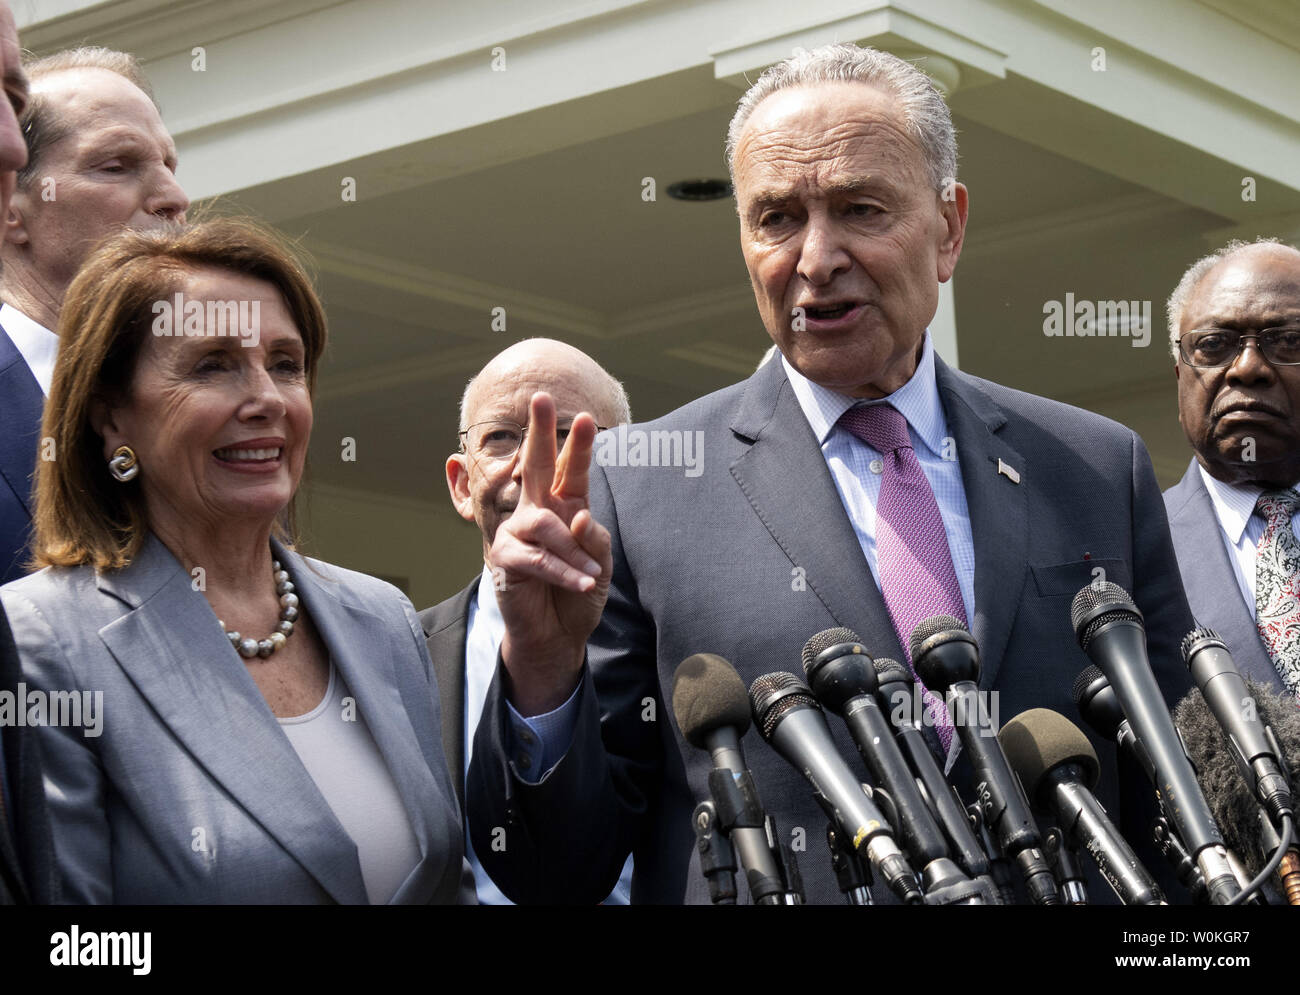 Senate Minority Leader Chuch Schumer holds up two fingers as he discusses a two million dollar infrastructure bill with reporters after meeting President Donald Trump at the White House in Washington on April 30, 2019. Speaker of the House Nancy Pelosi is at left.  Democrat congressional leaders met with Trump on a possible two trillion dollar infrastructure legislation.    Photo by Pat Benic/UPI Stock Photo